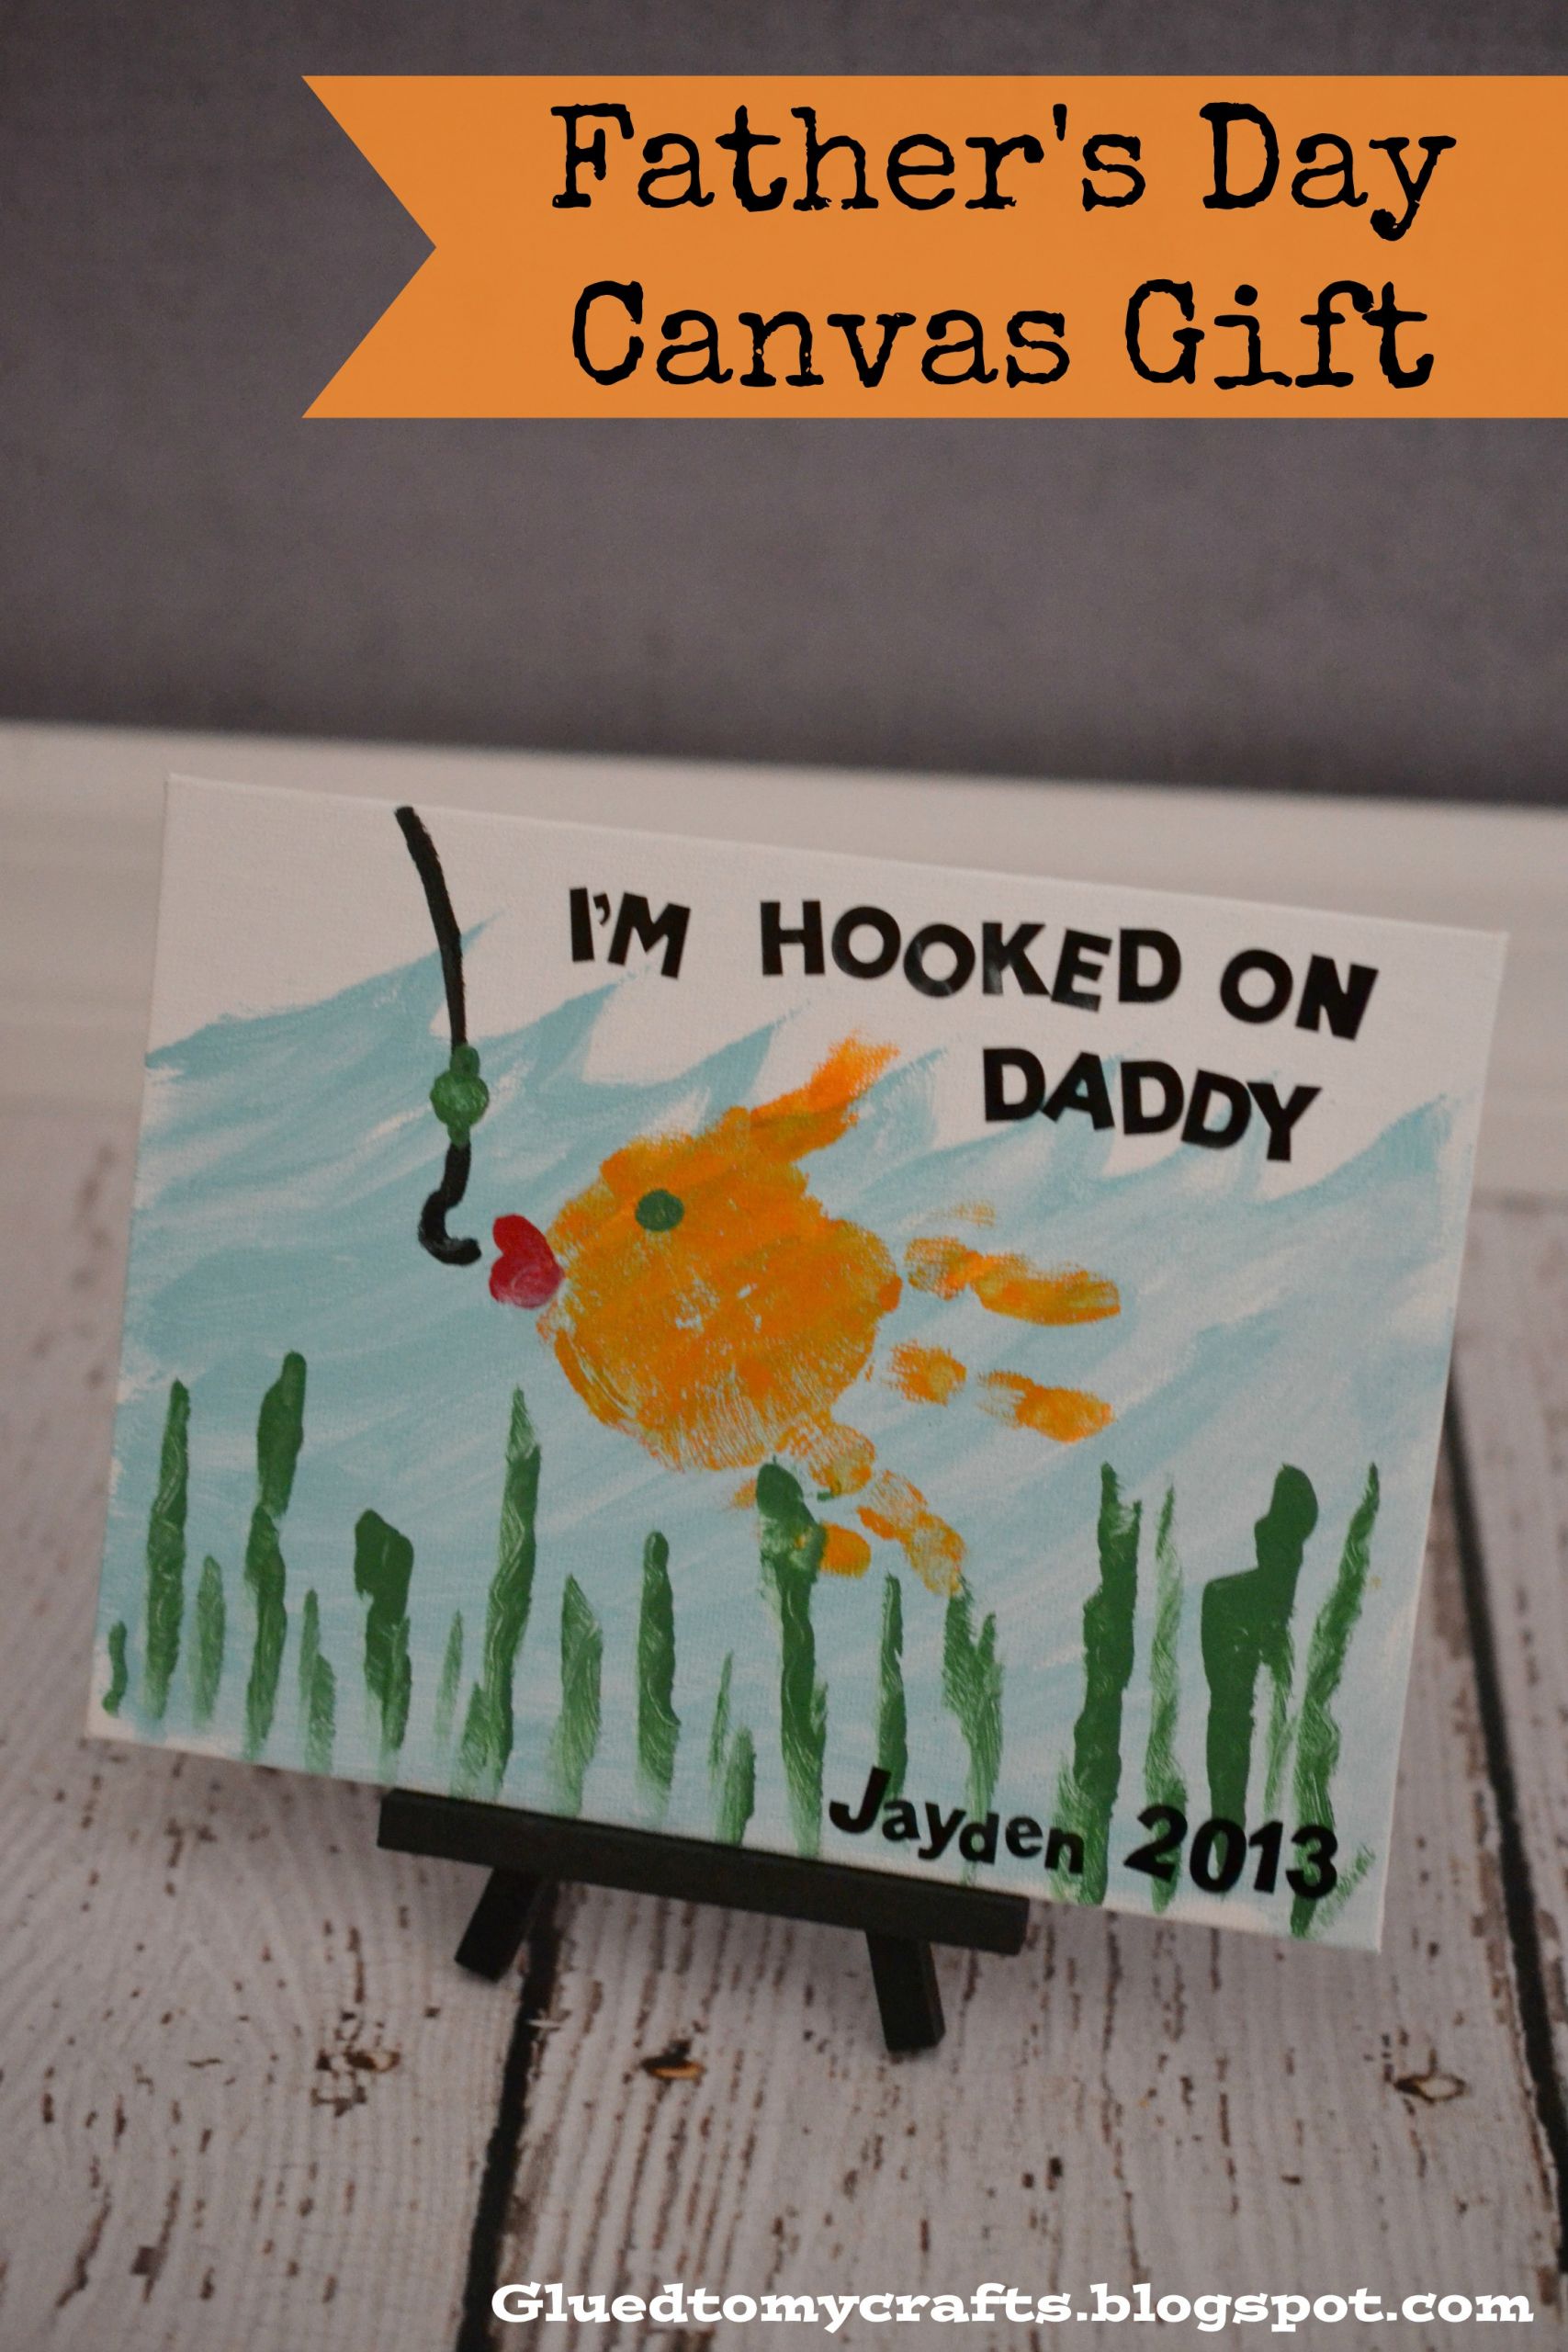 Fathers Day Gift Ideas Crafts
 Fathers Day Make a Canvas Gift Mom it Forward